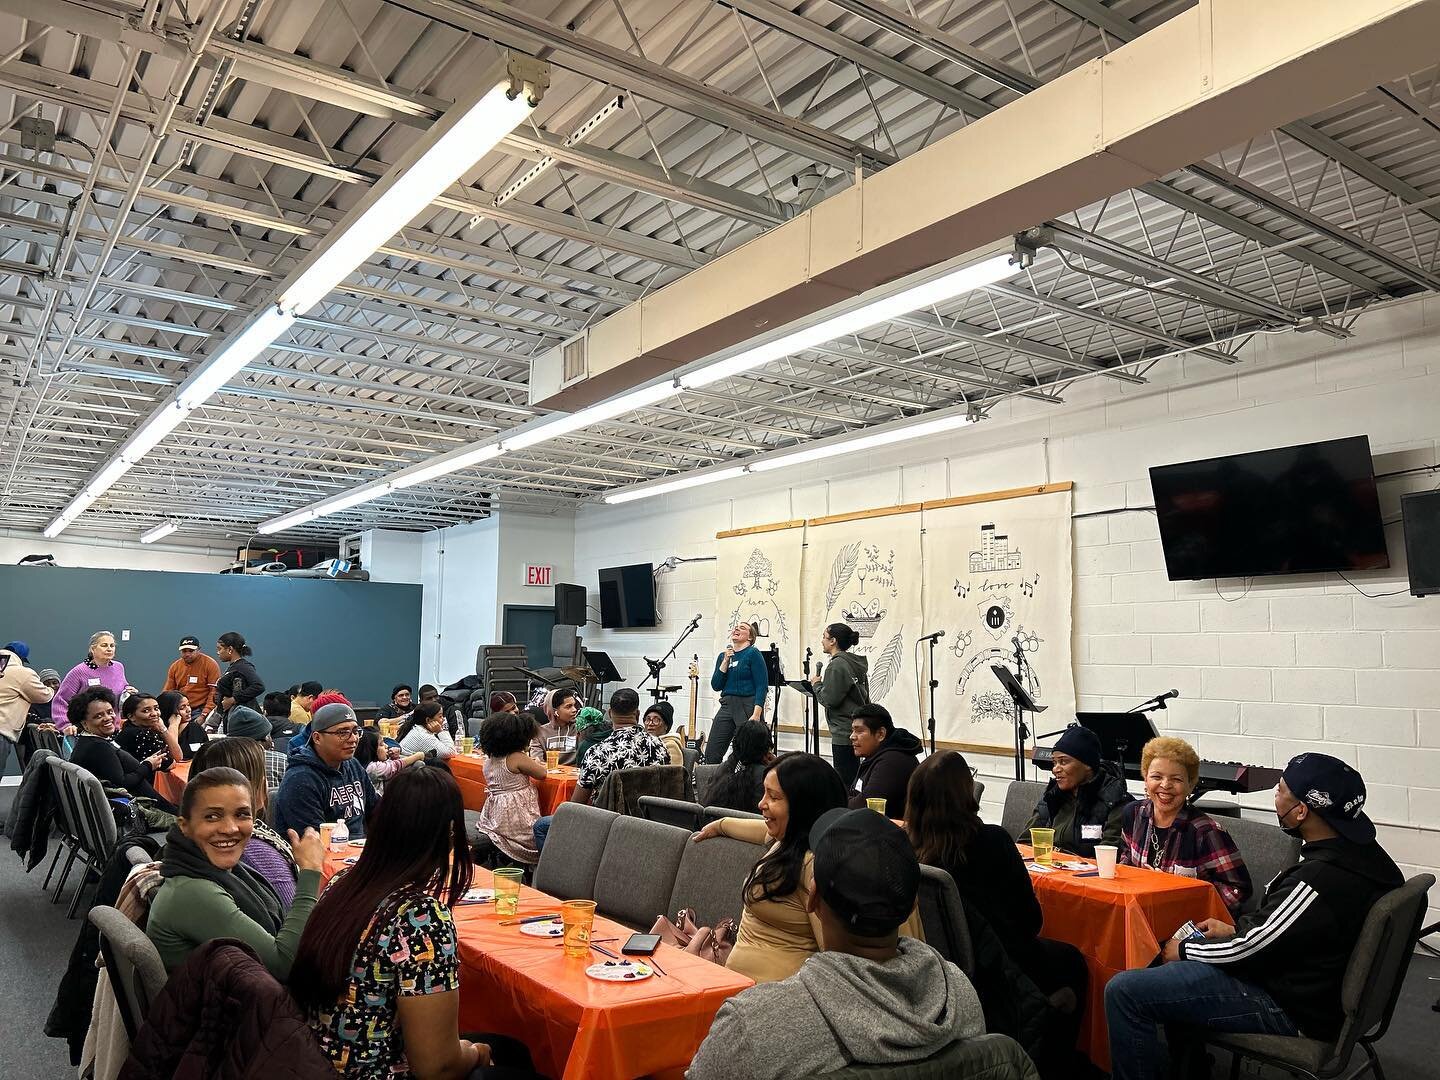 We celebrated a thanksgiving meal and paint night for our ESL students last night, we love seeing so many from our neighborhood enjoy being served in our space. We also shared why we serve because Jesus died to serve us! 
.
.
.
Anoche celebramos una 